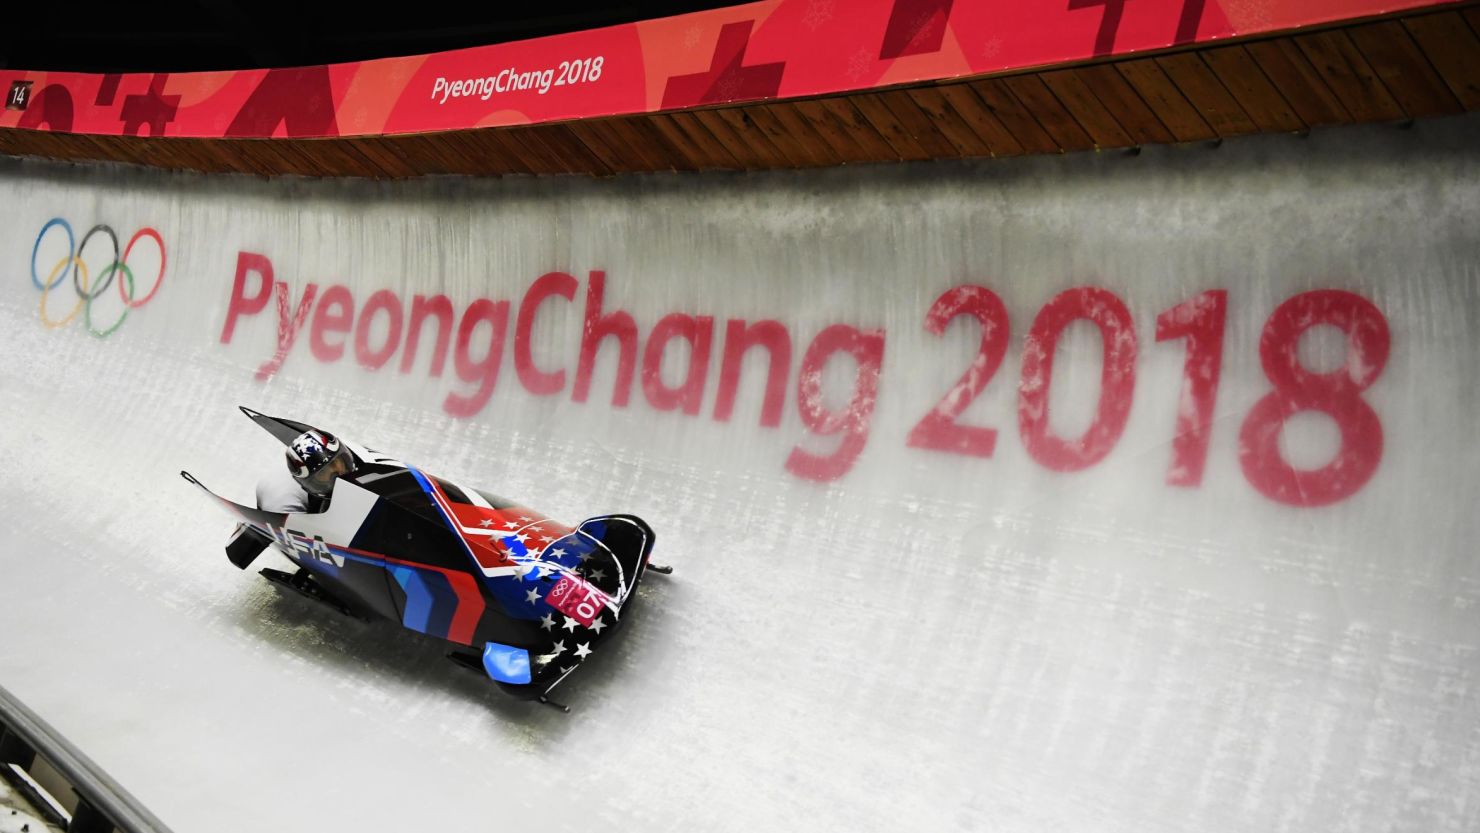 Jamie Greubel Poser and Aja Evans of the United States slide during the Women's Bobsleigh heats on day twelve of the PyeongChang 2018 Winter Olympic Games in Pyeongchang-gun, South Korea.